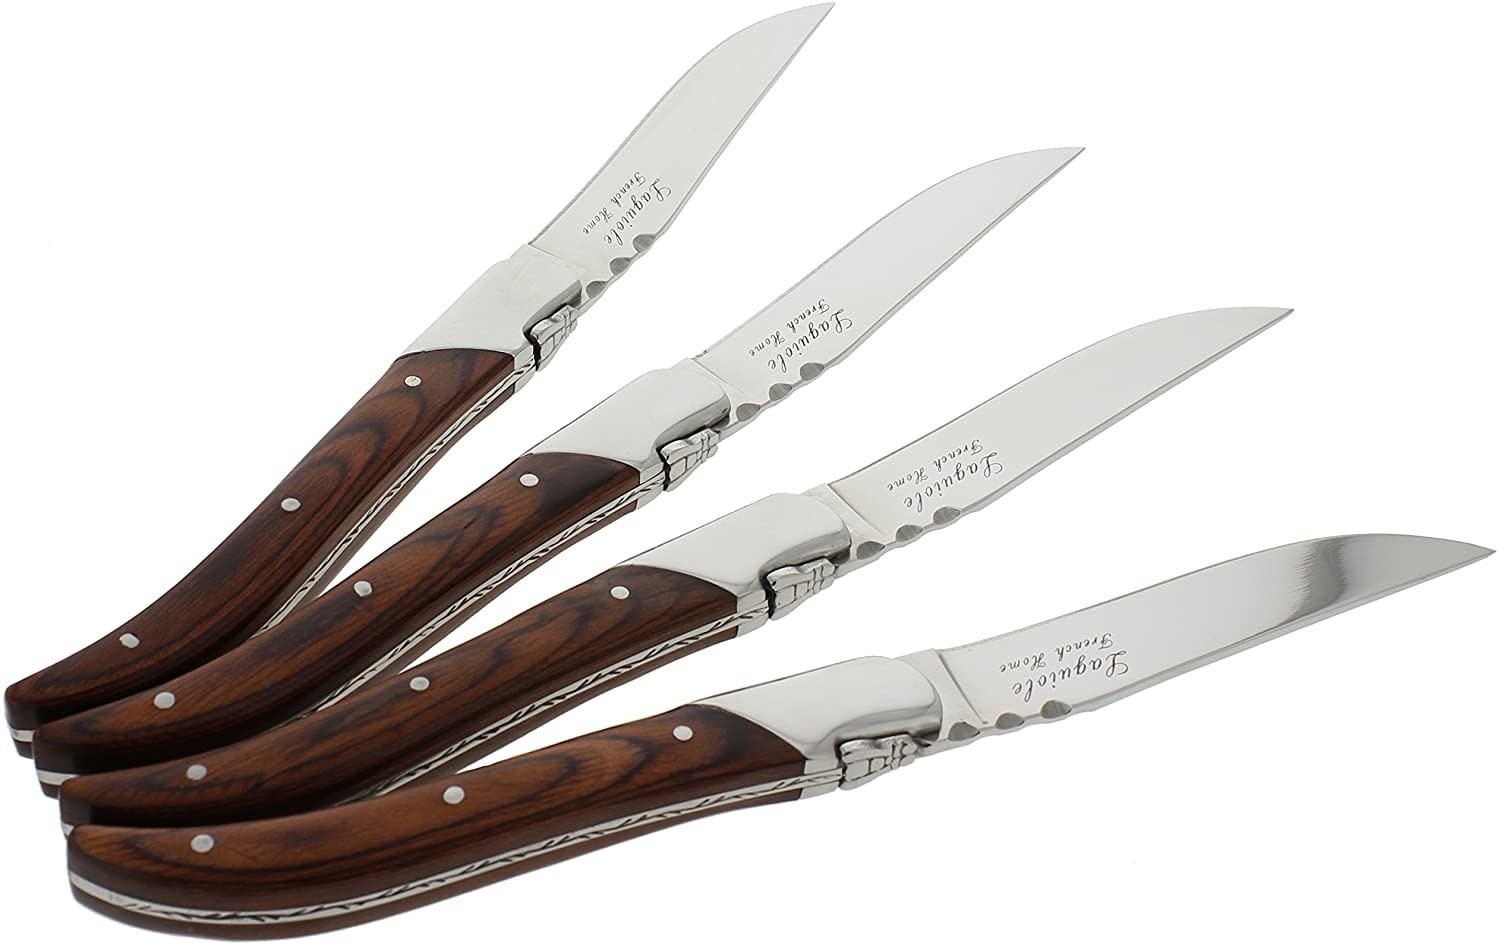 Laguiole Heavy Stainless Steel Steak Knives, set of 4 - Whisk